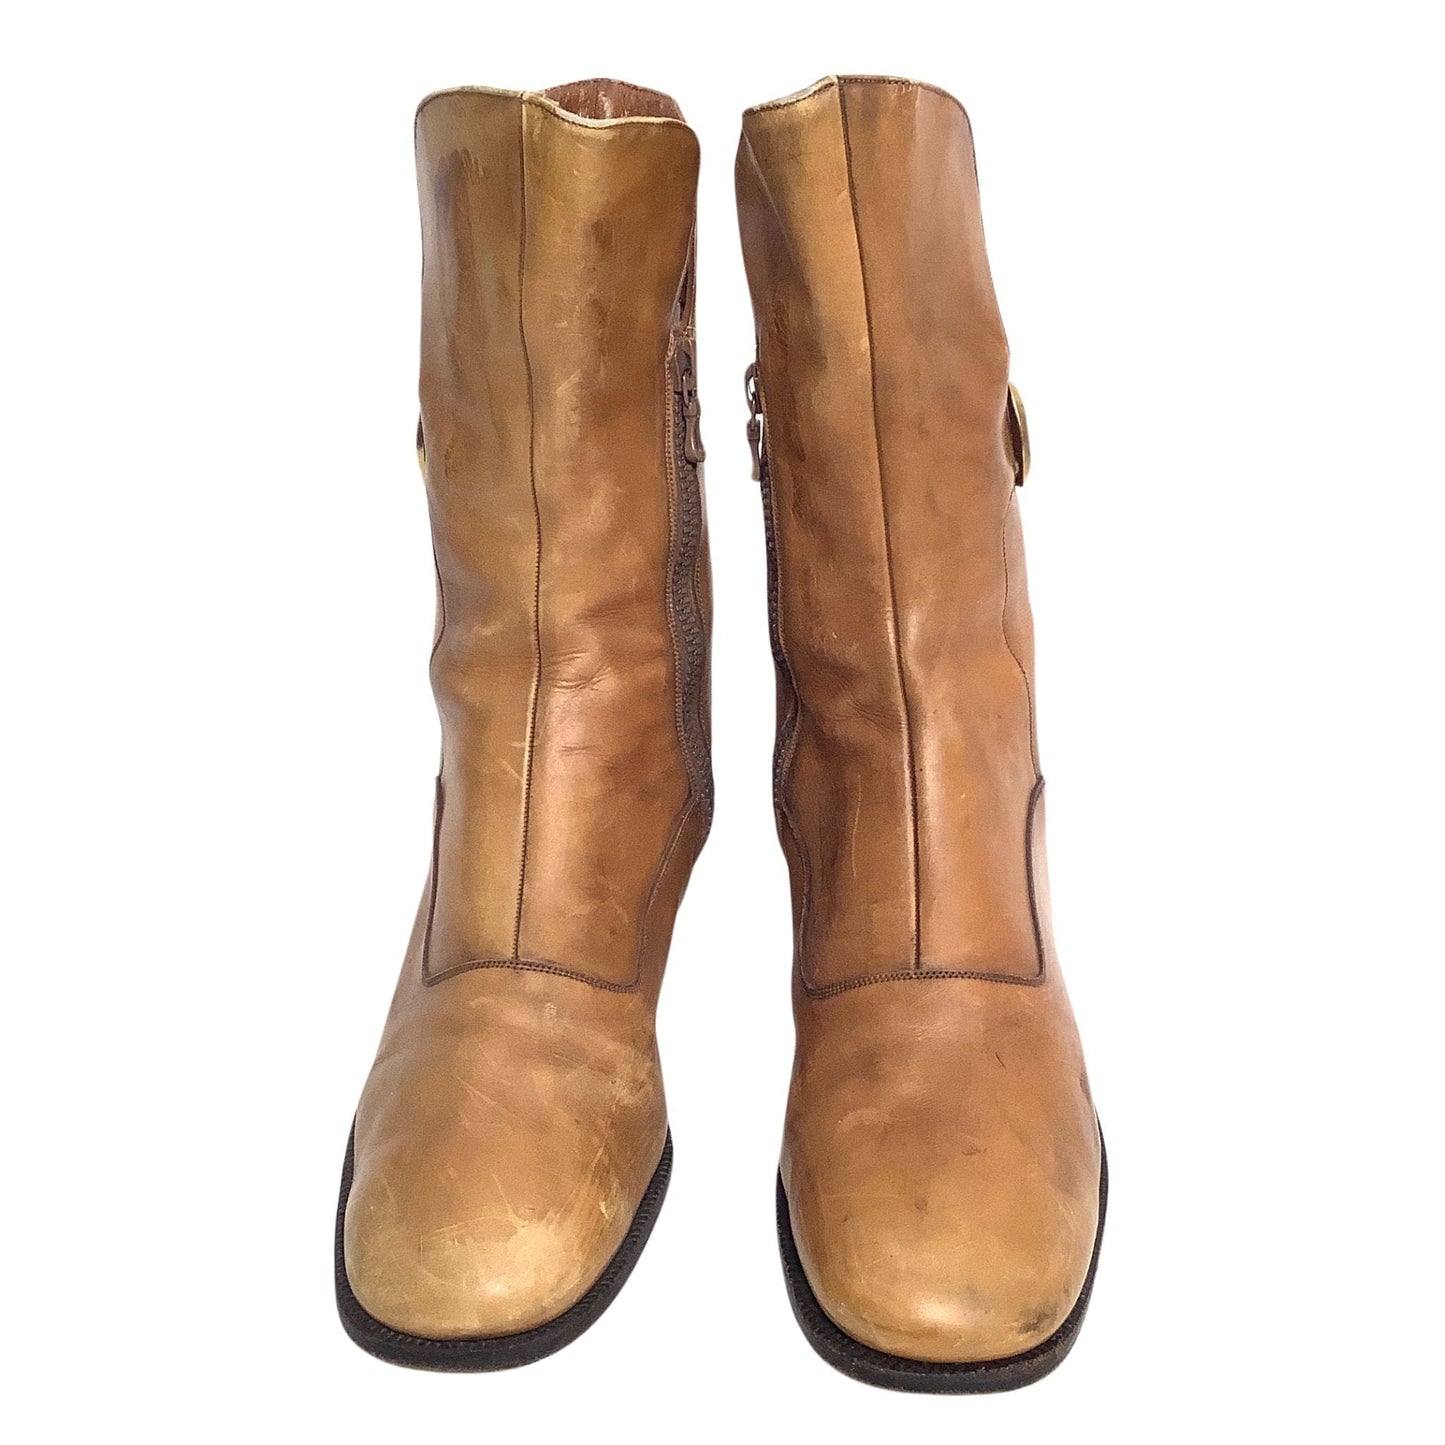 Tan Leather Ankle Boots 8.5 / Tan / Vintage 1960s